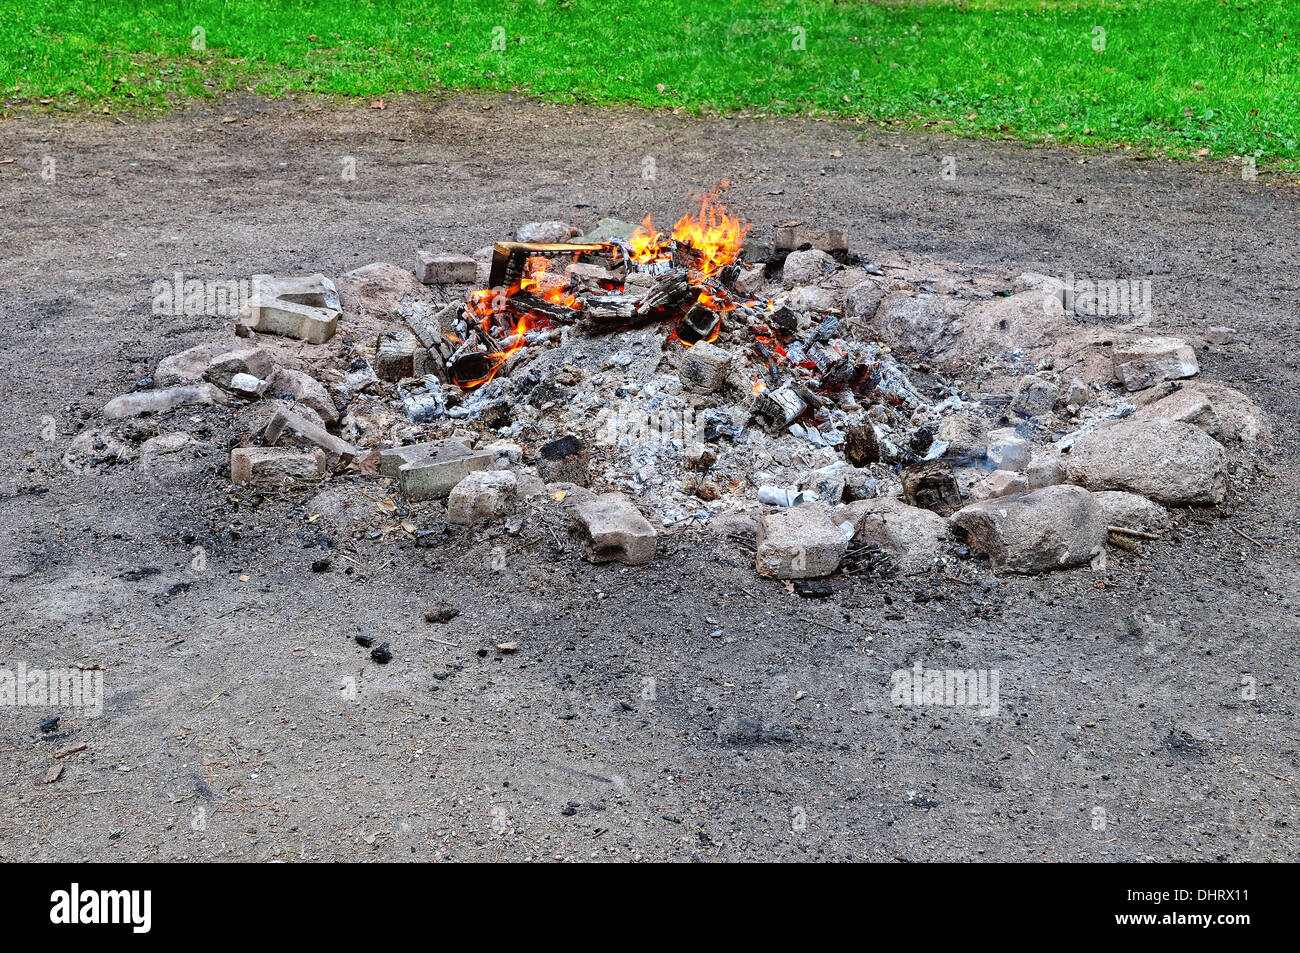 fire pit in the open Stock Photo